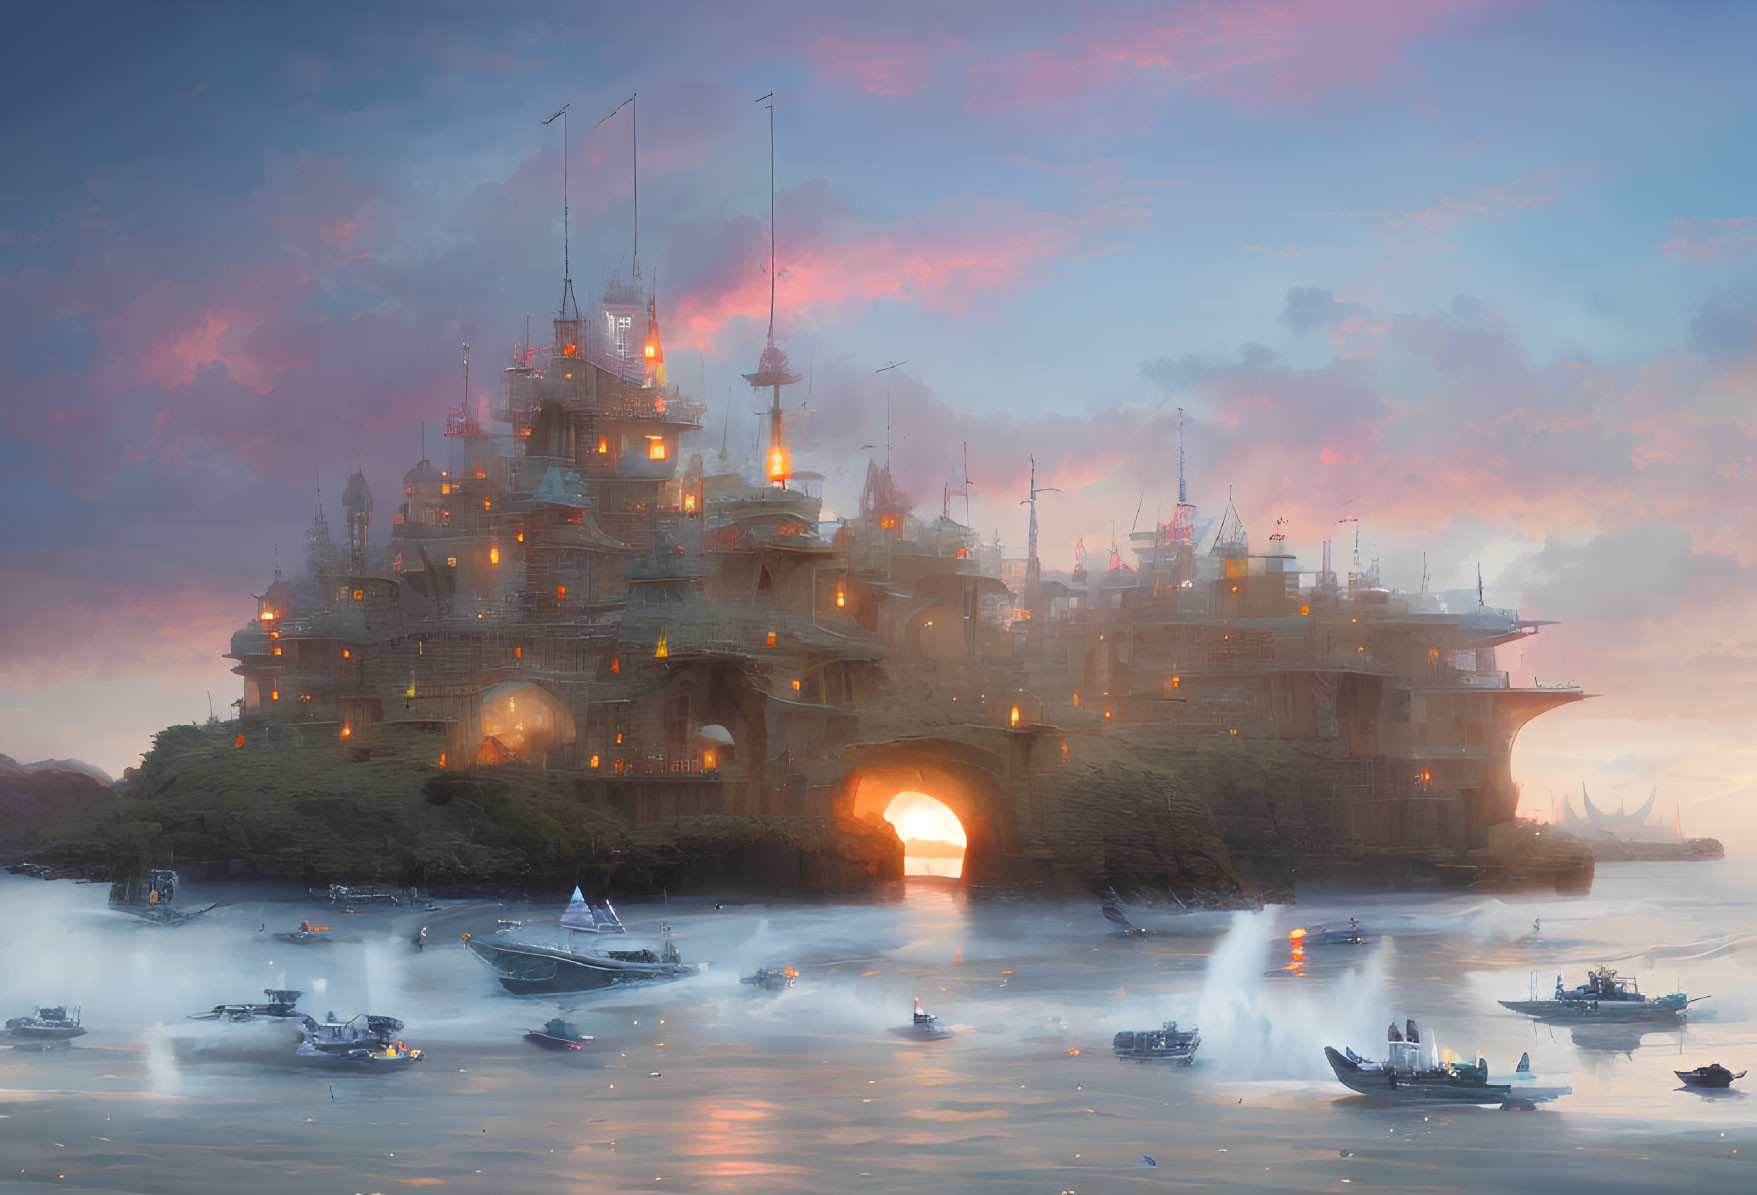 Fantasy castle with spires, warm lights, misty water, boats at twilight